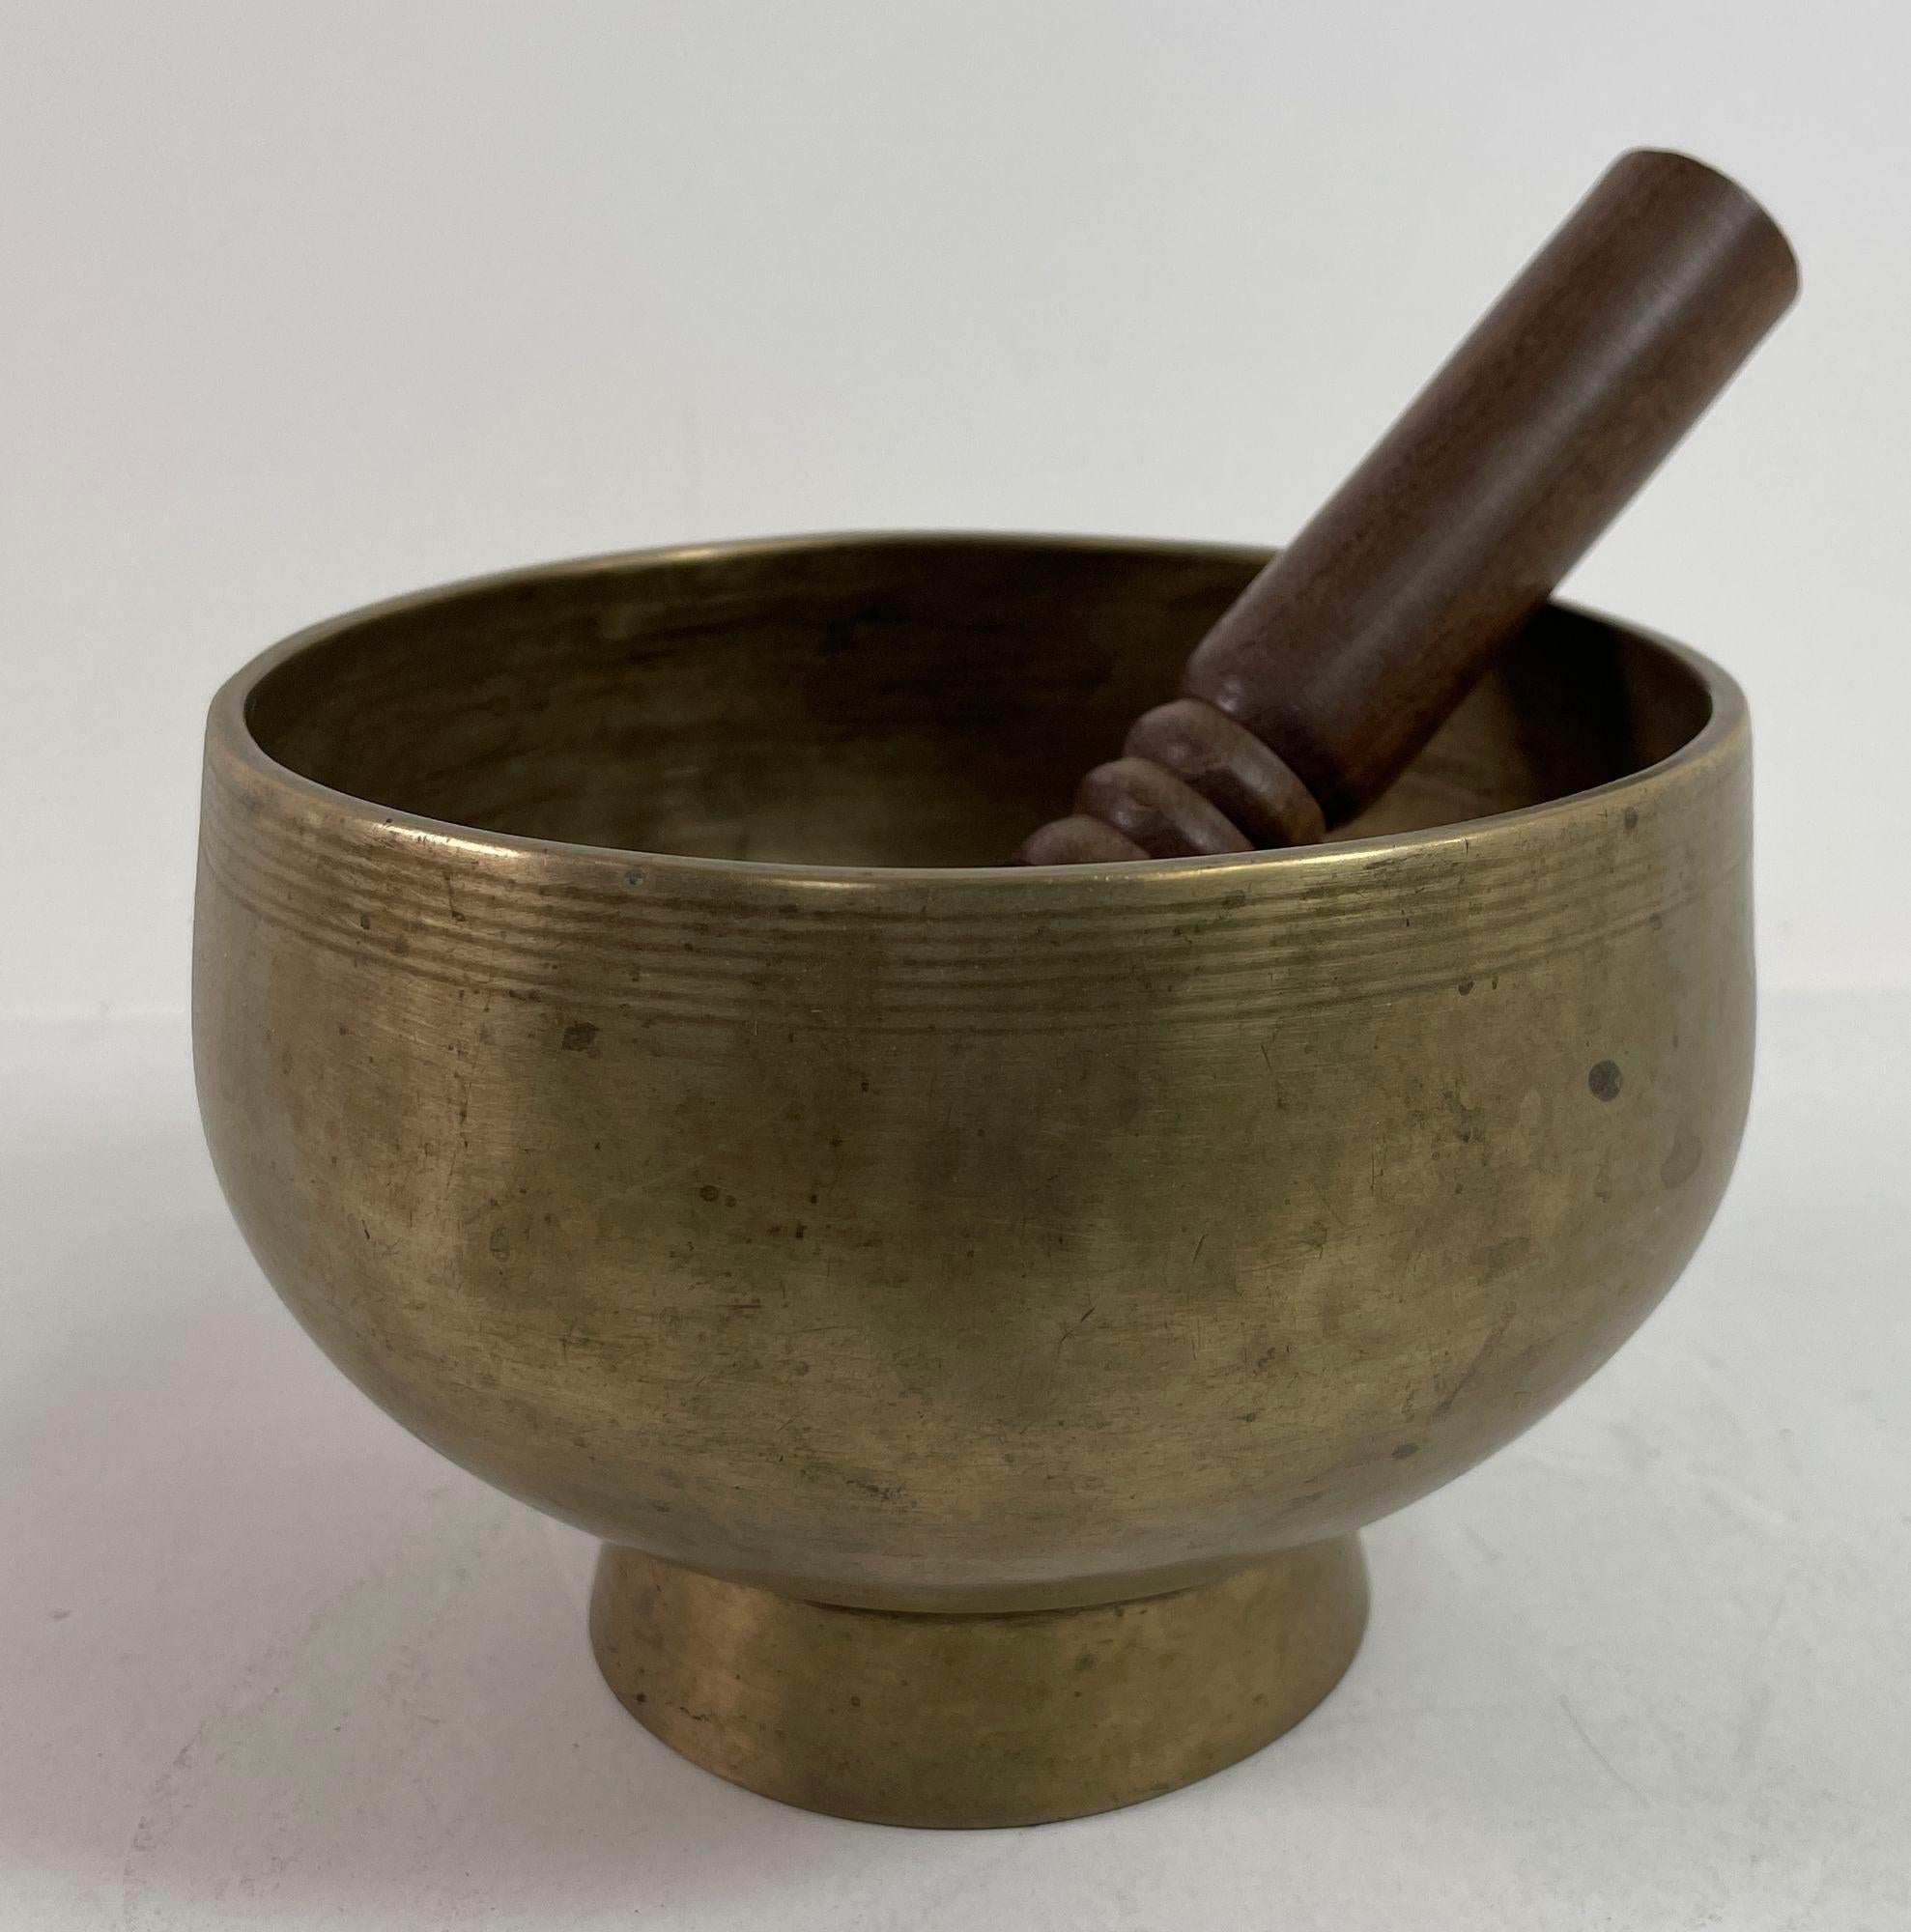 Vintage Asian Hammered Footed Bronze Singing Bowl with inscriptions 1950s.
Asian Bronze Vessel Singing Footed Bowl.
Featuring hammered design of a fish and inscriptions around the vessel.
A special collectible piece.
Made from bronze, a good heavy